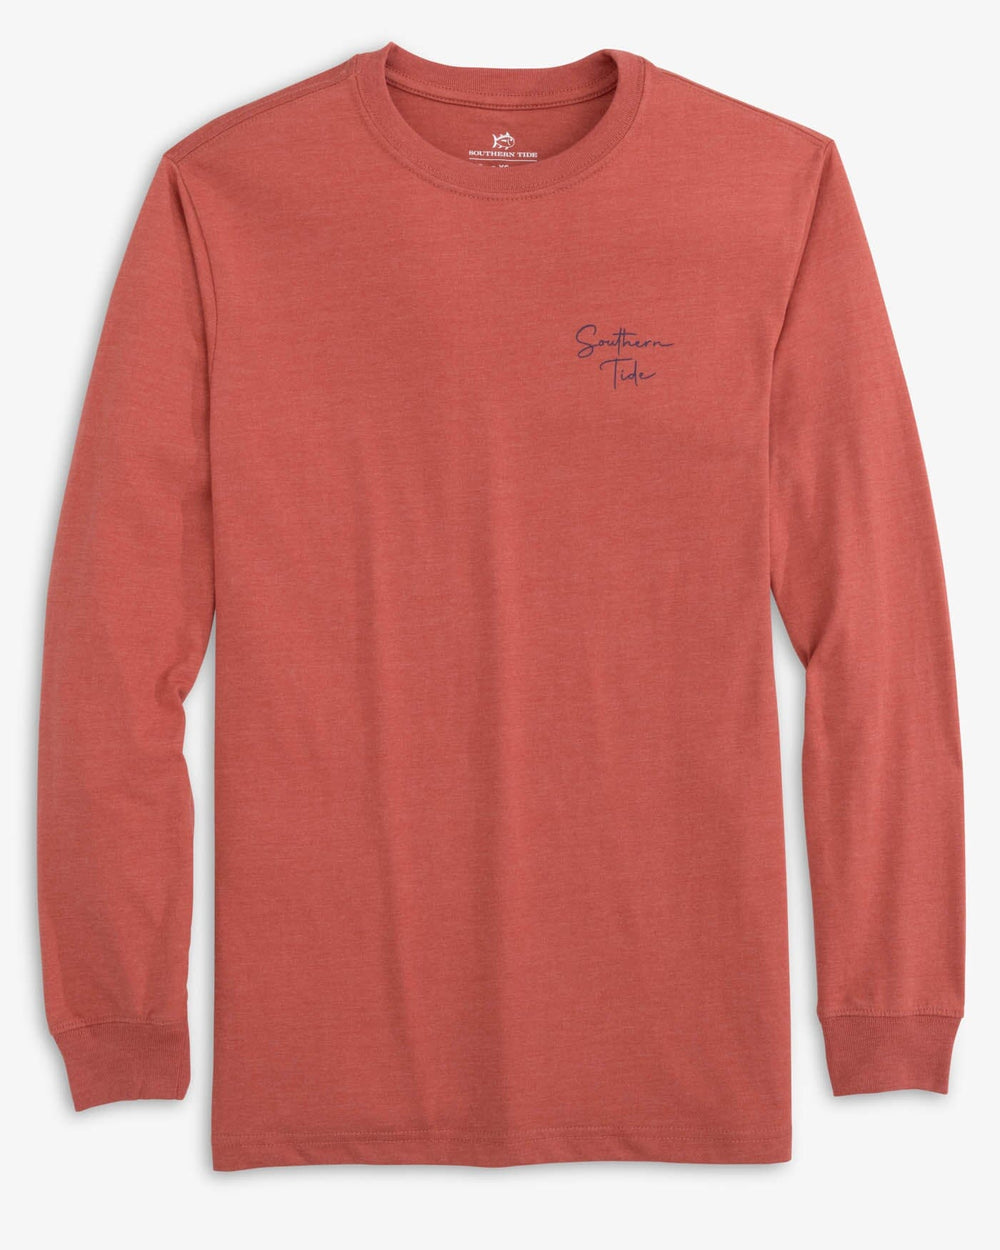 The front view of the Southern Tide Heather Beach Side Long Sleeve T-shirt by Southern Tide - Heather Dusty Coral